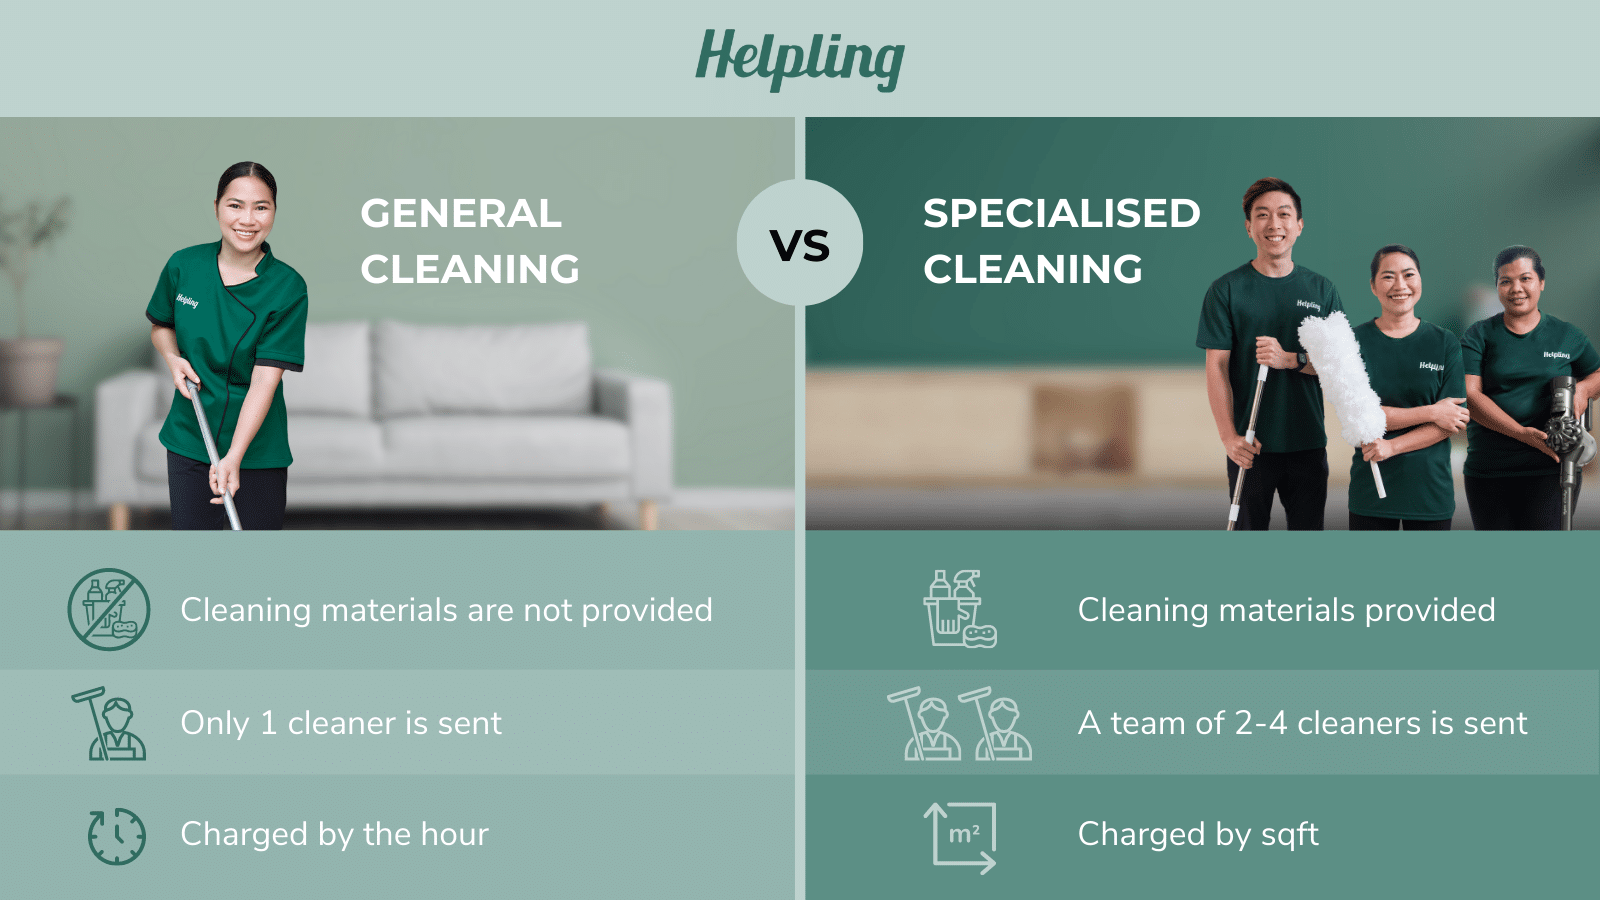 general cleaning vs specialised cleaning - differences